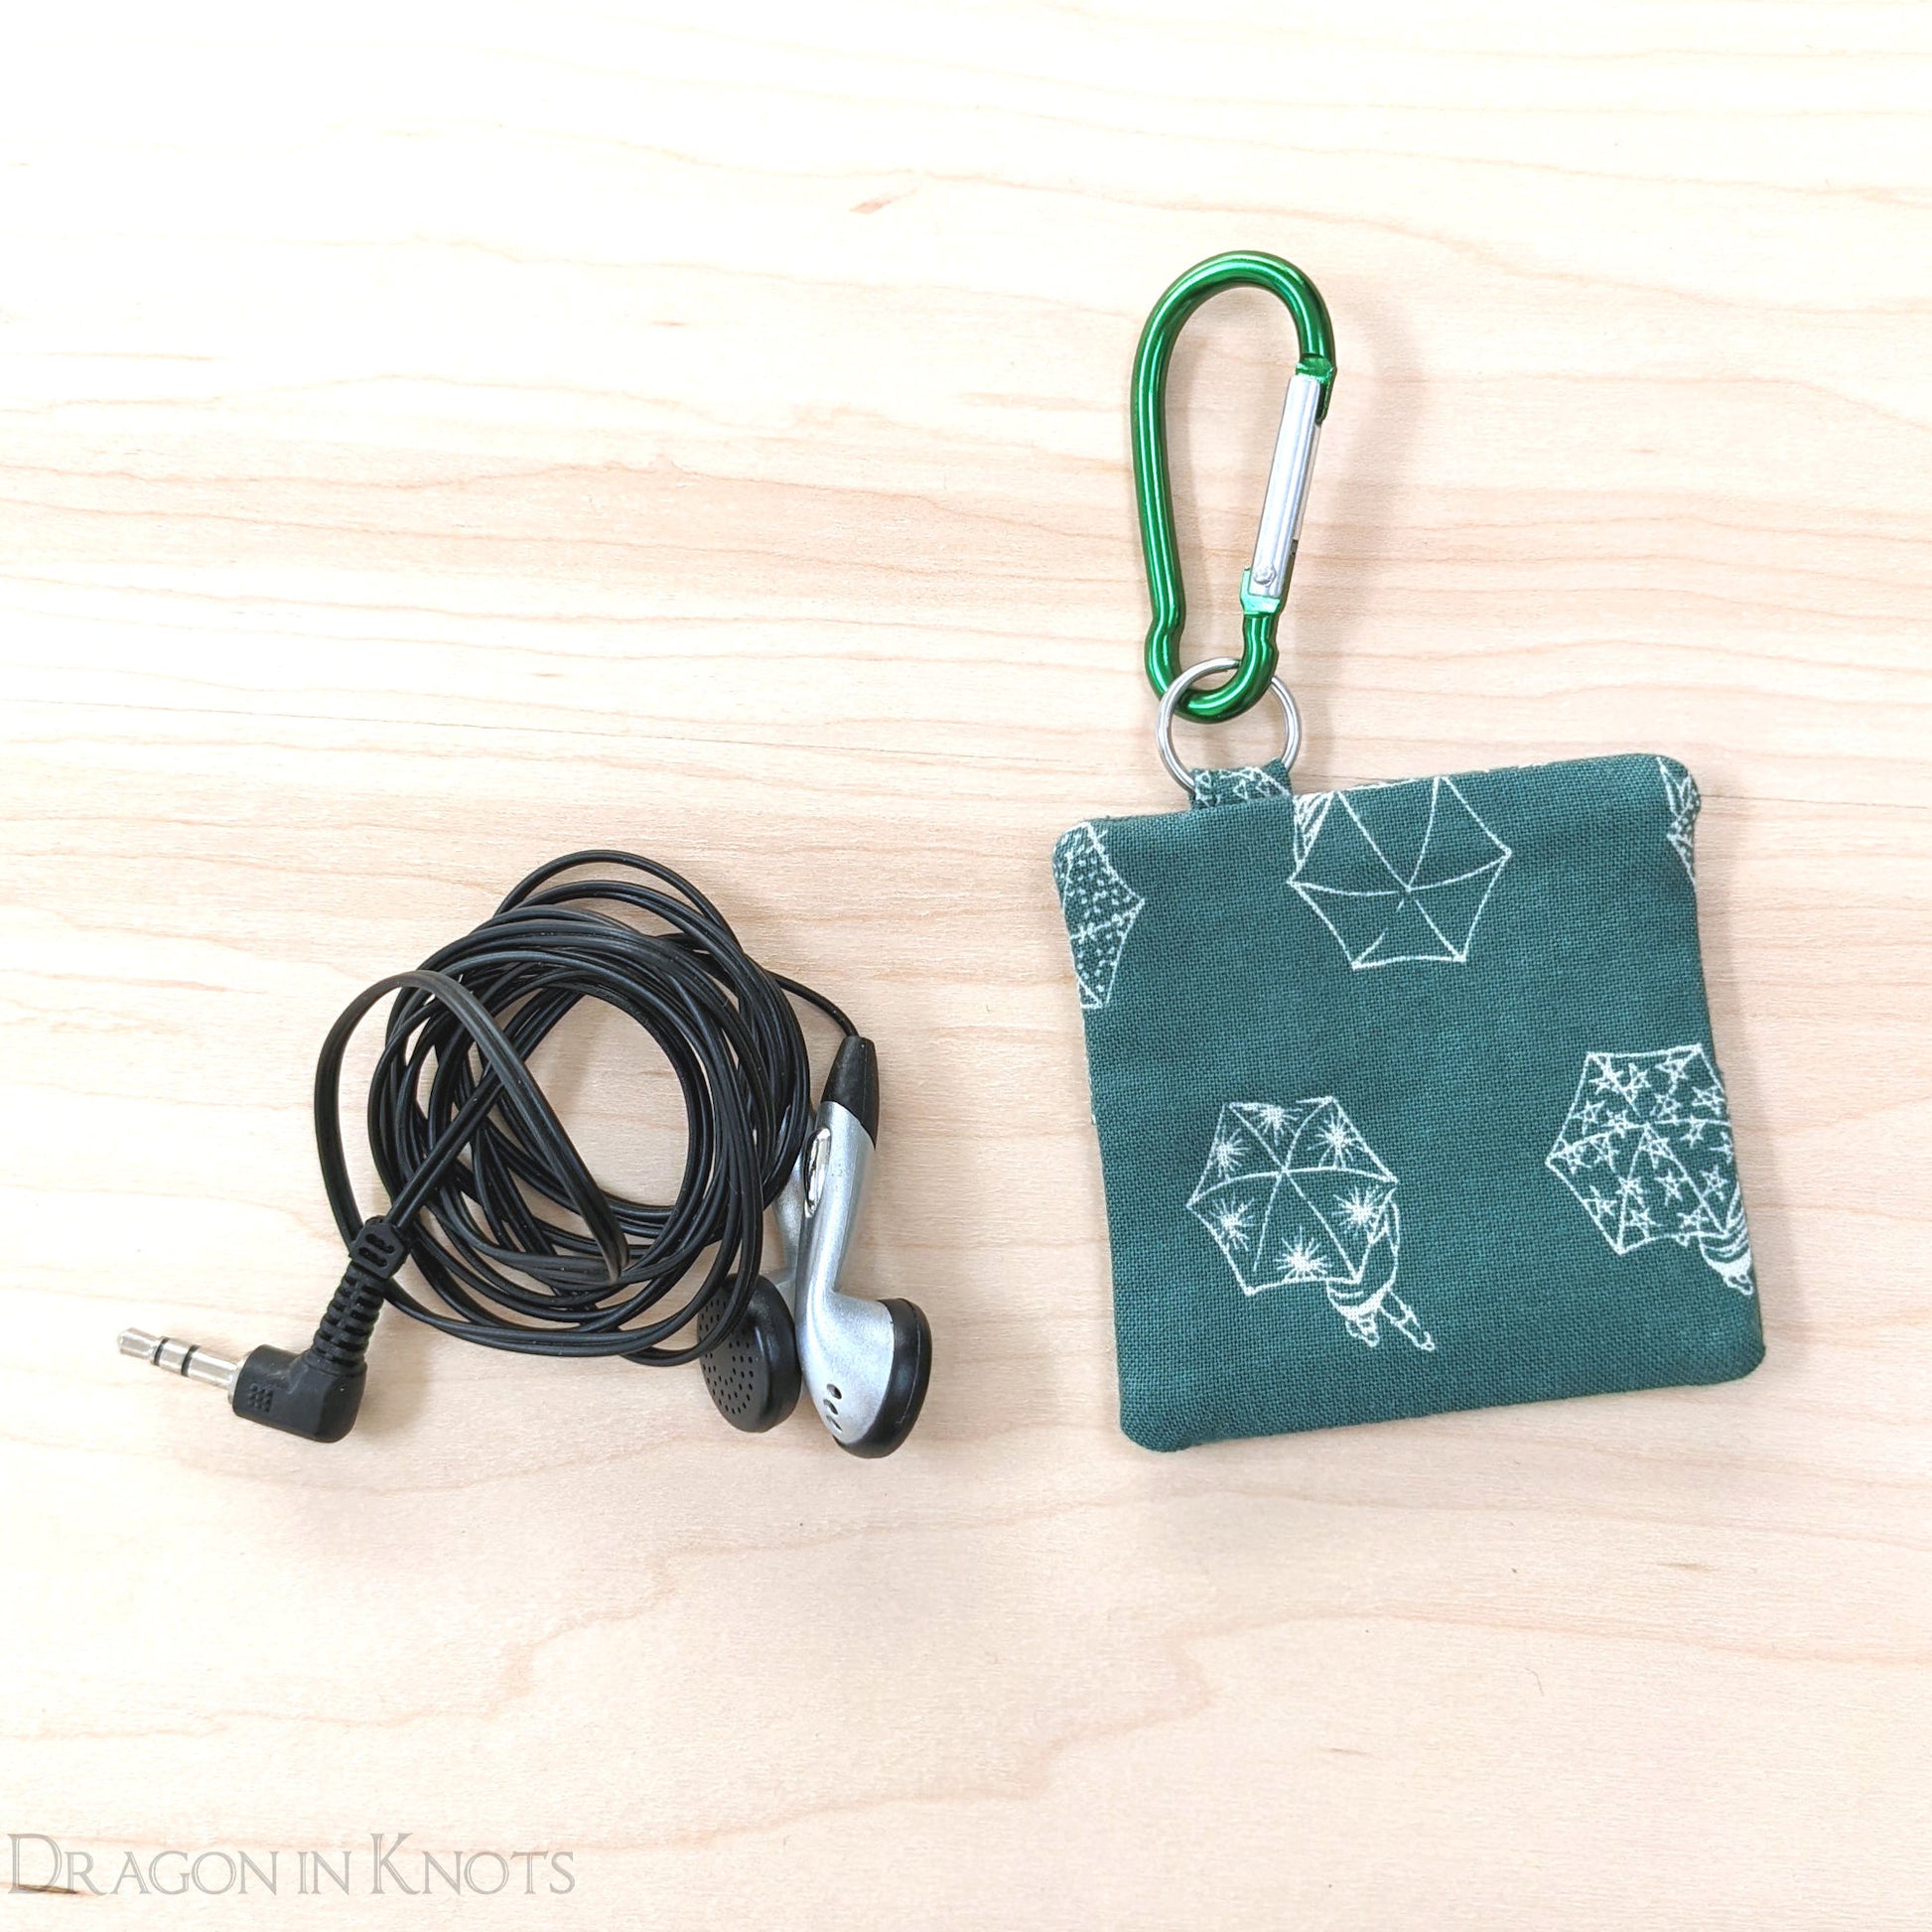 Rainy Day Pouch for Earbuds, Guitar Picks, or Earplugs - Dragon in Knots